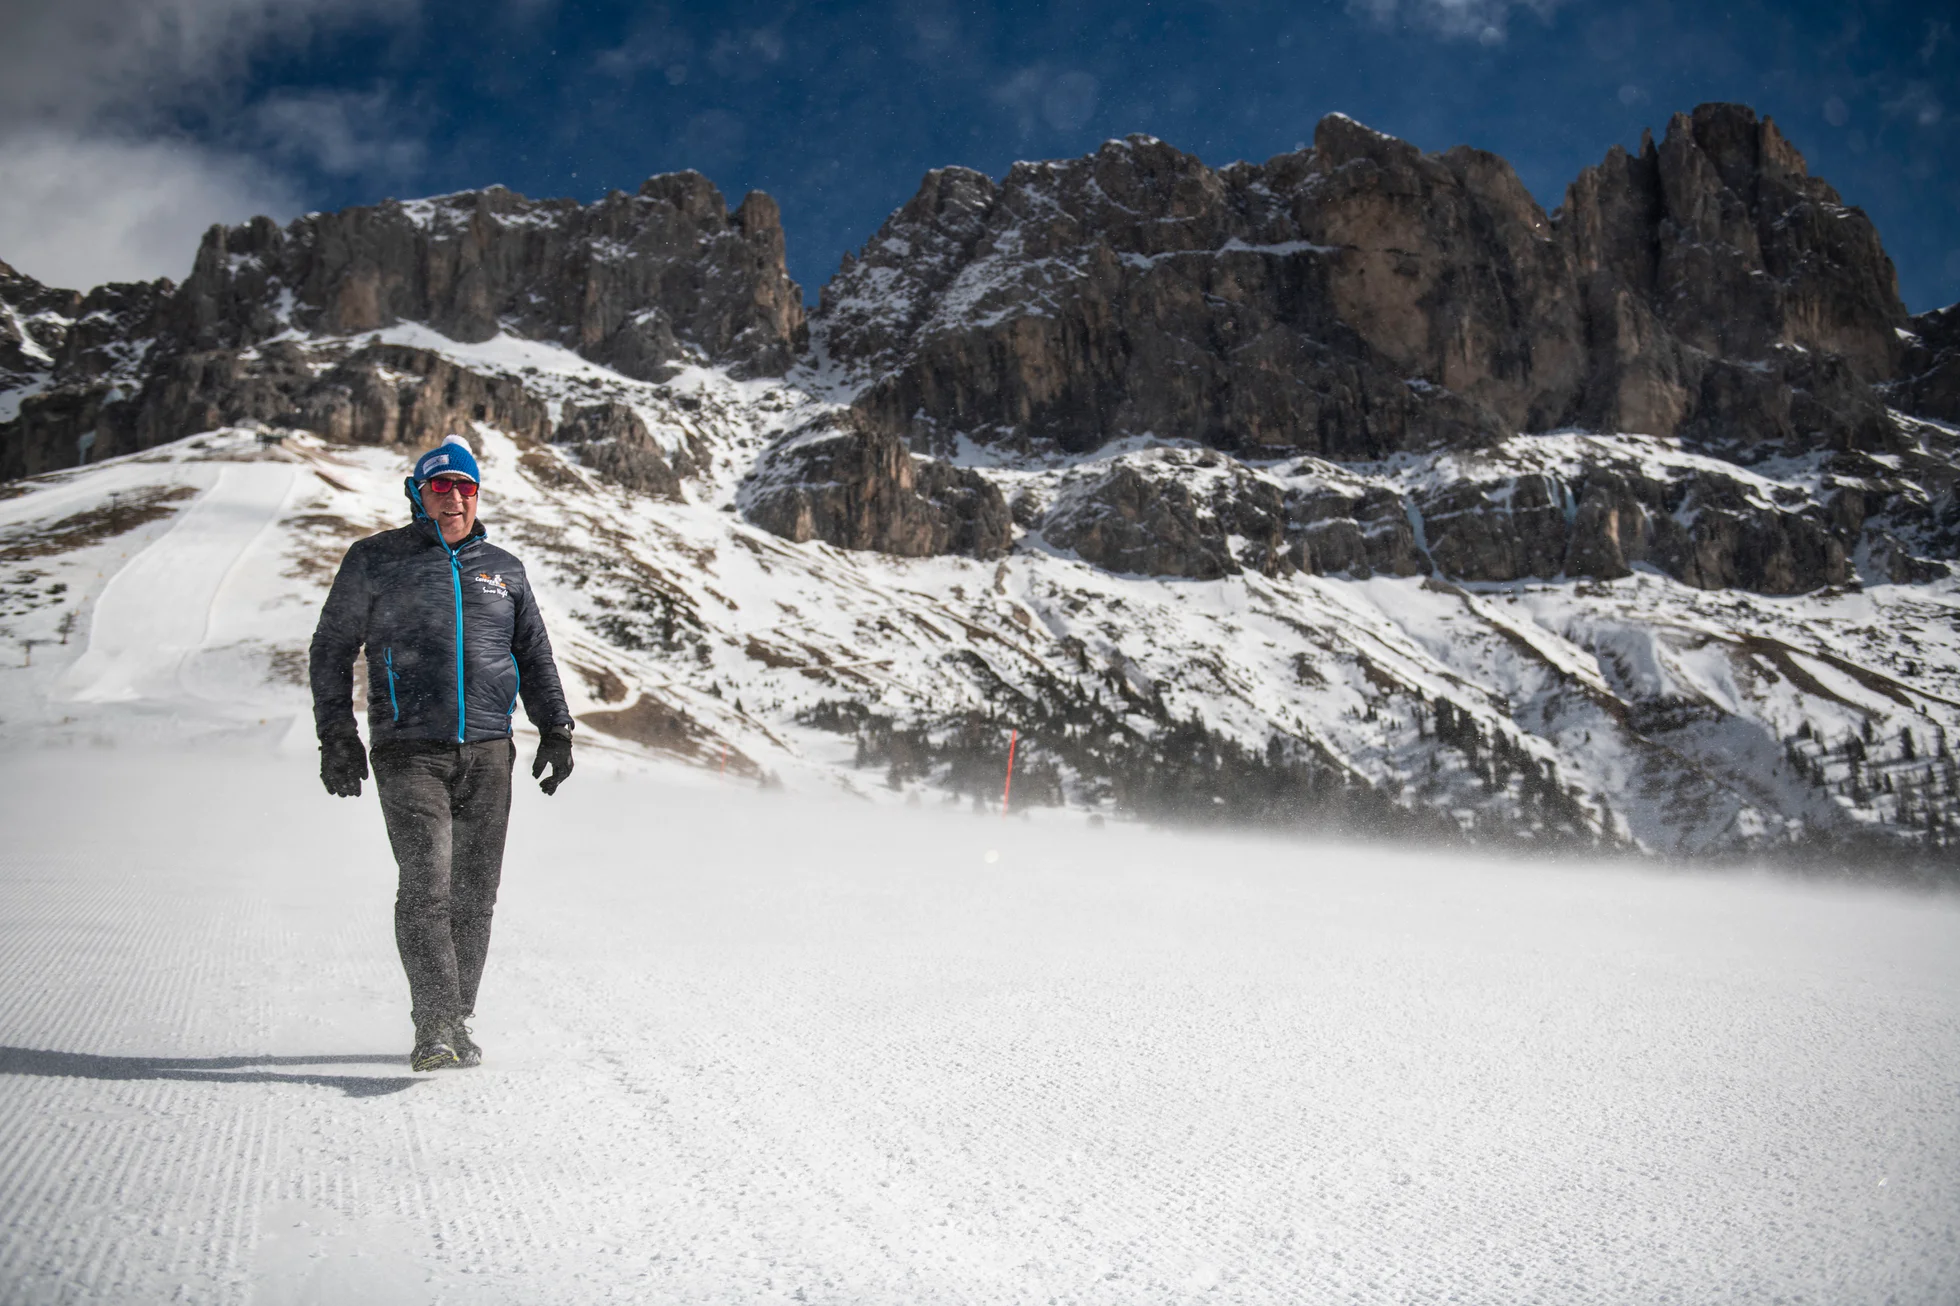 Snow expert Georg Eisath strides across an expanse of snow in front of a mountain panorama.